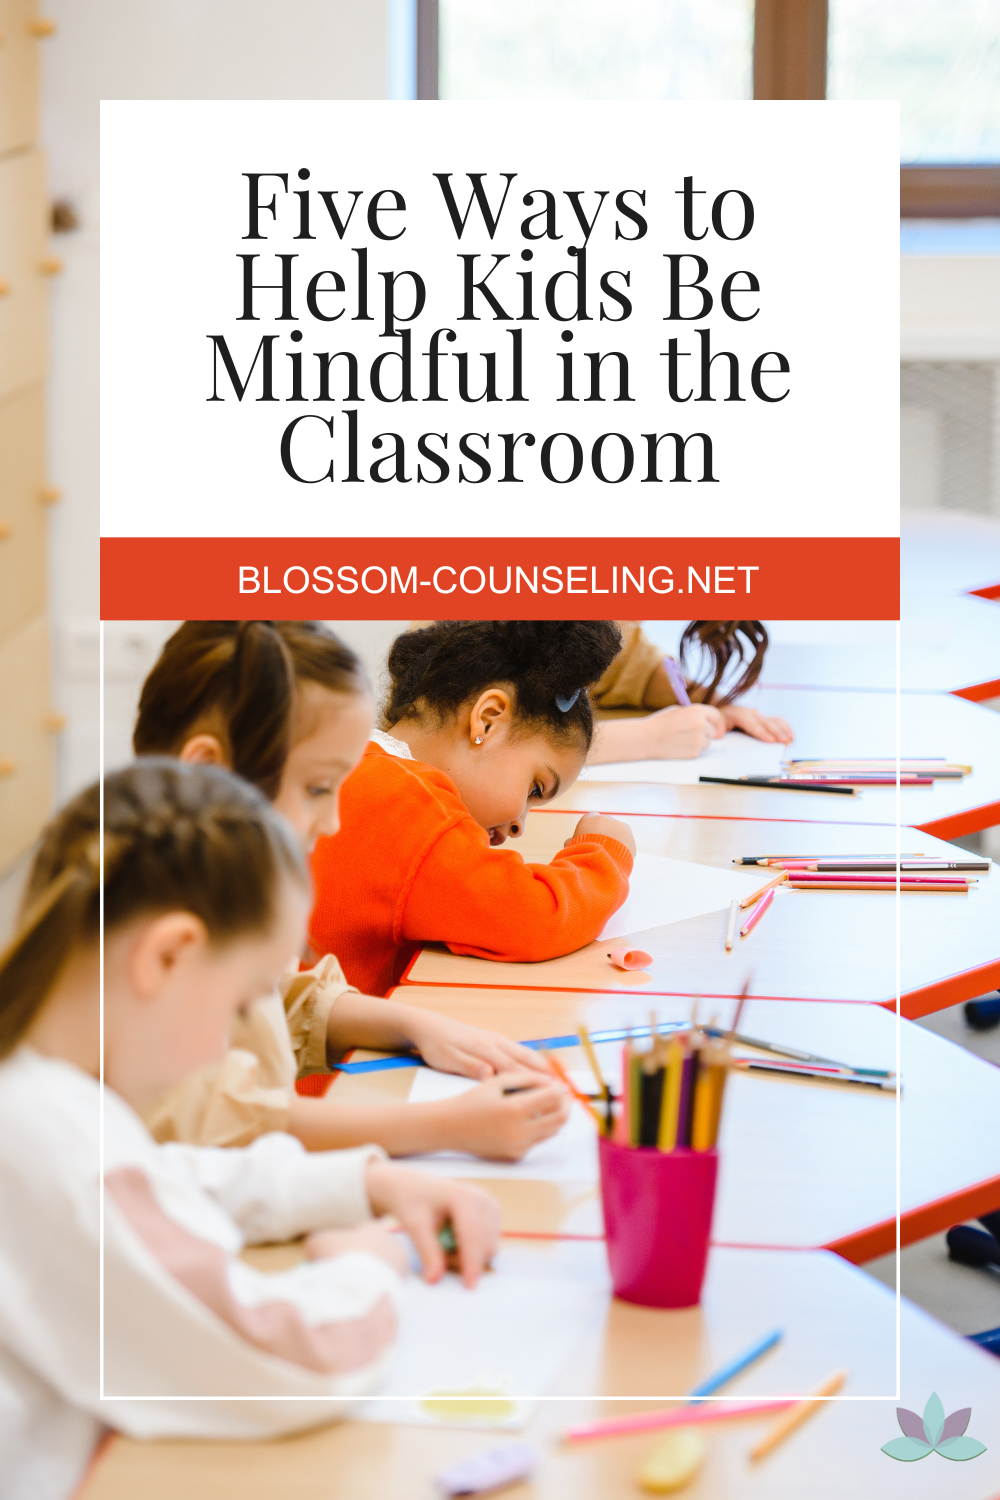 Five Ways to Help Kids Be Mindful in the Classroom